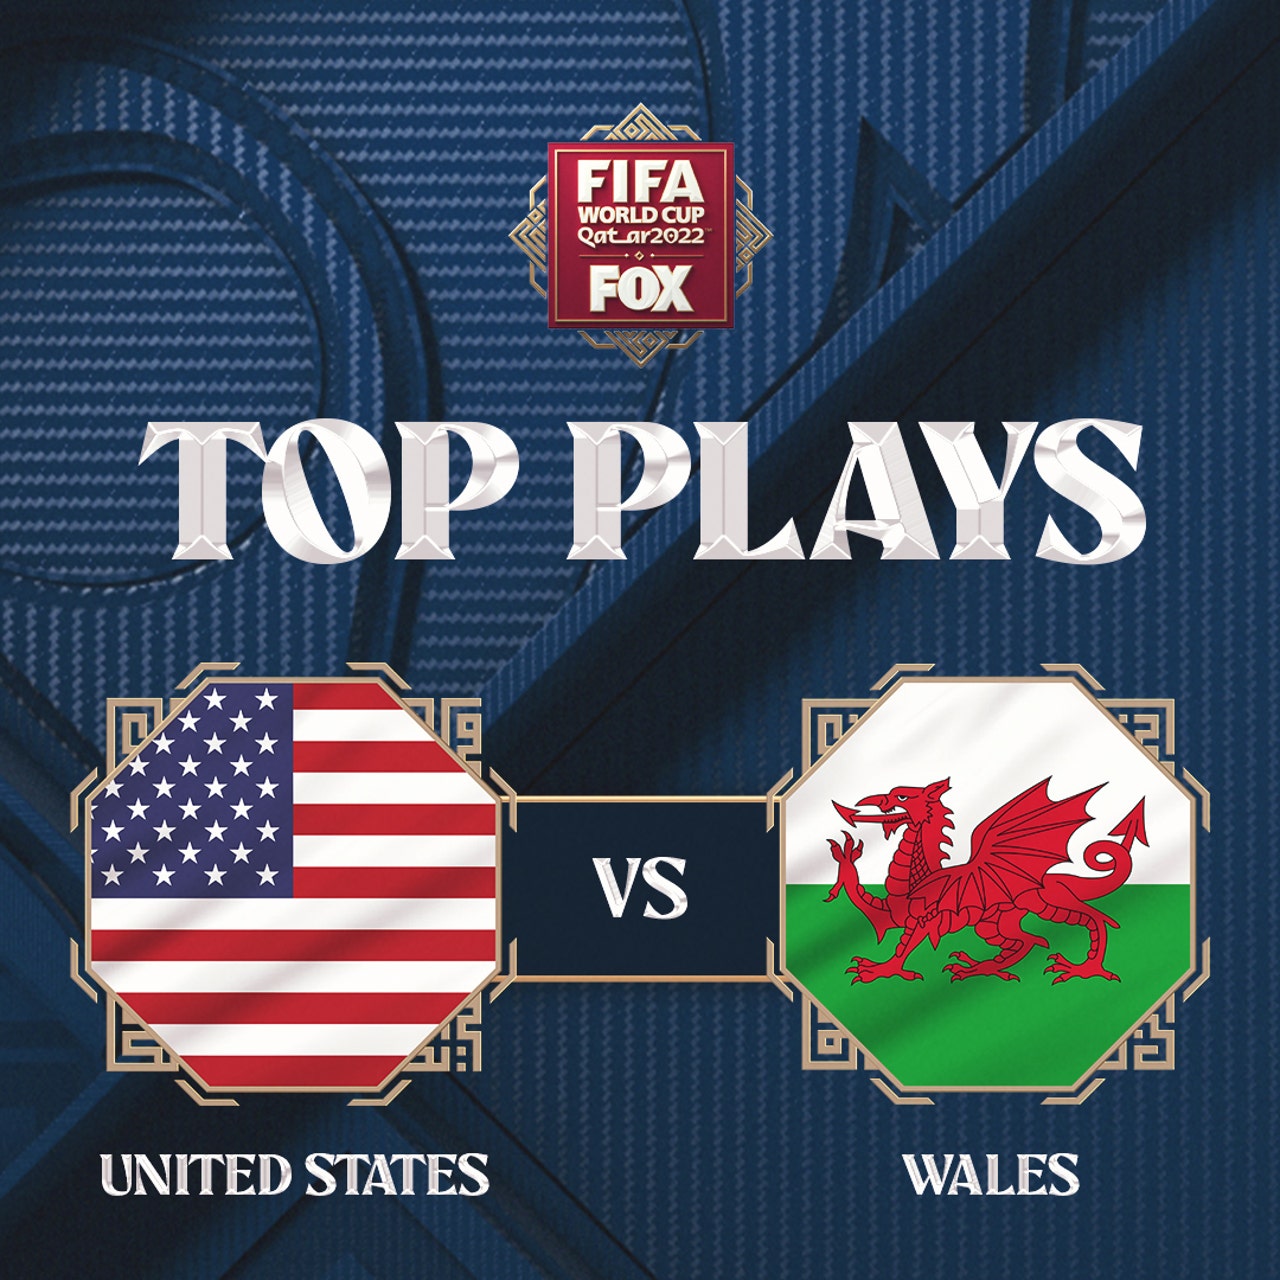 World Cup 2022 top plays USA-Wales ends in 1-1 draw FOX Sports